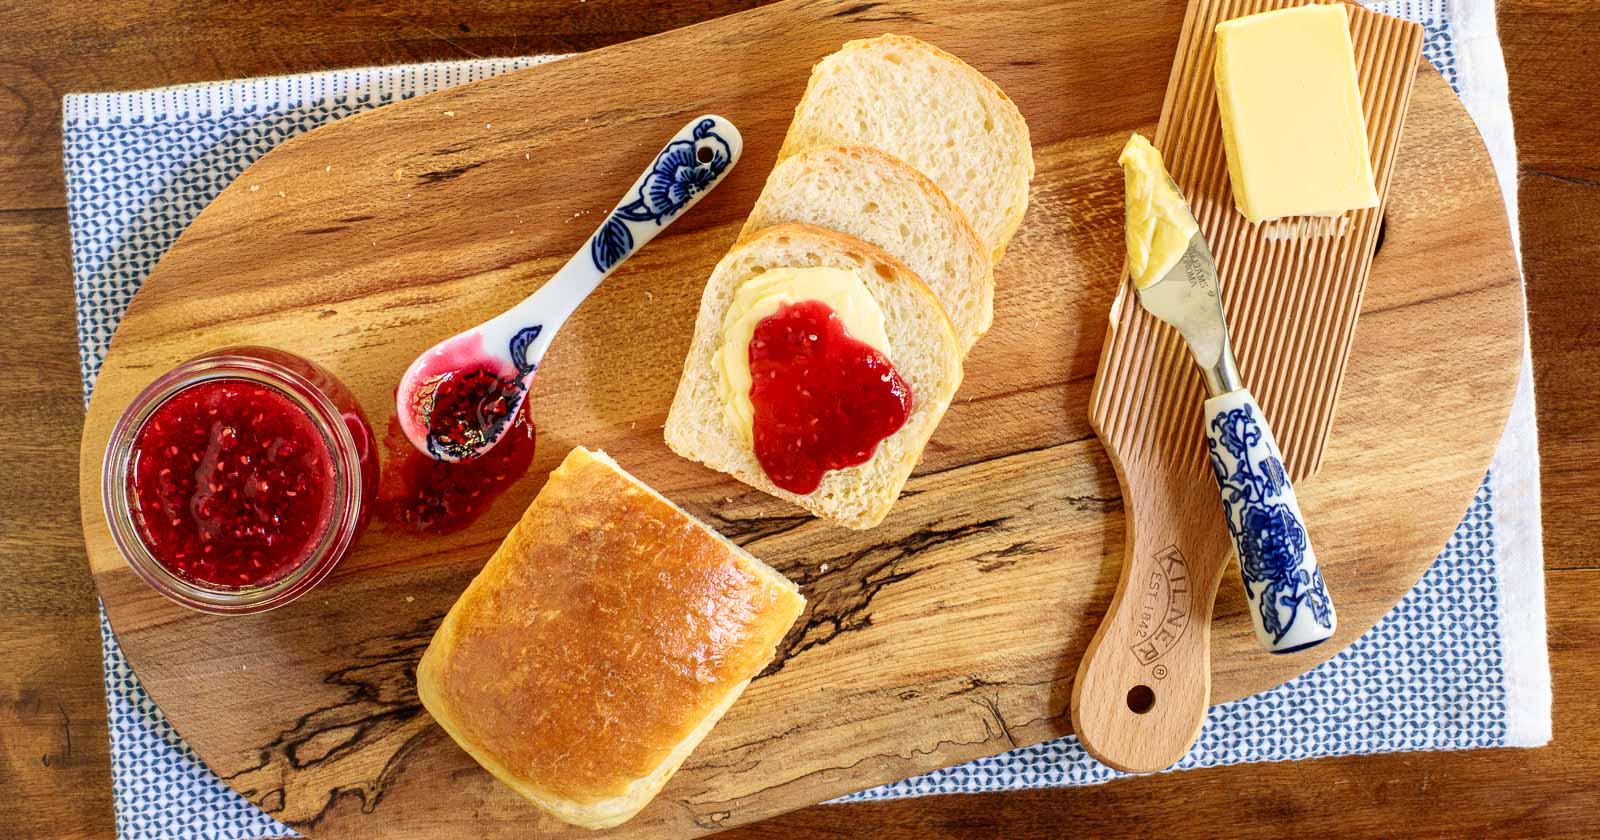 Horizontal overhead photo of homemade brioche bread on a wood cutting board with raspberry jam and fresh butter.